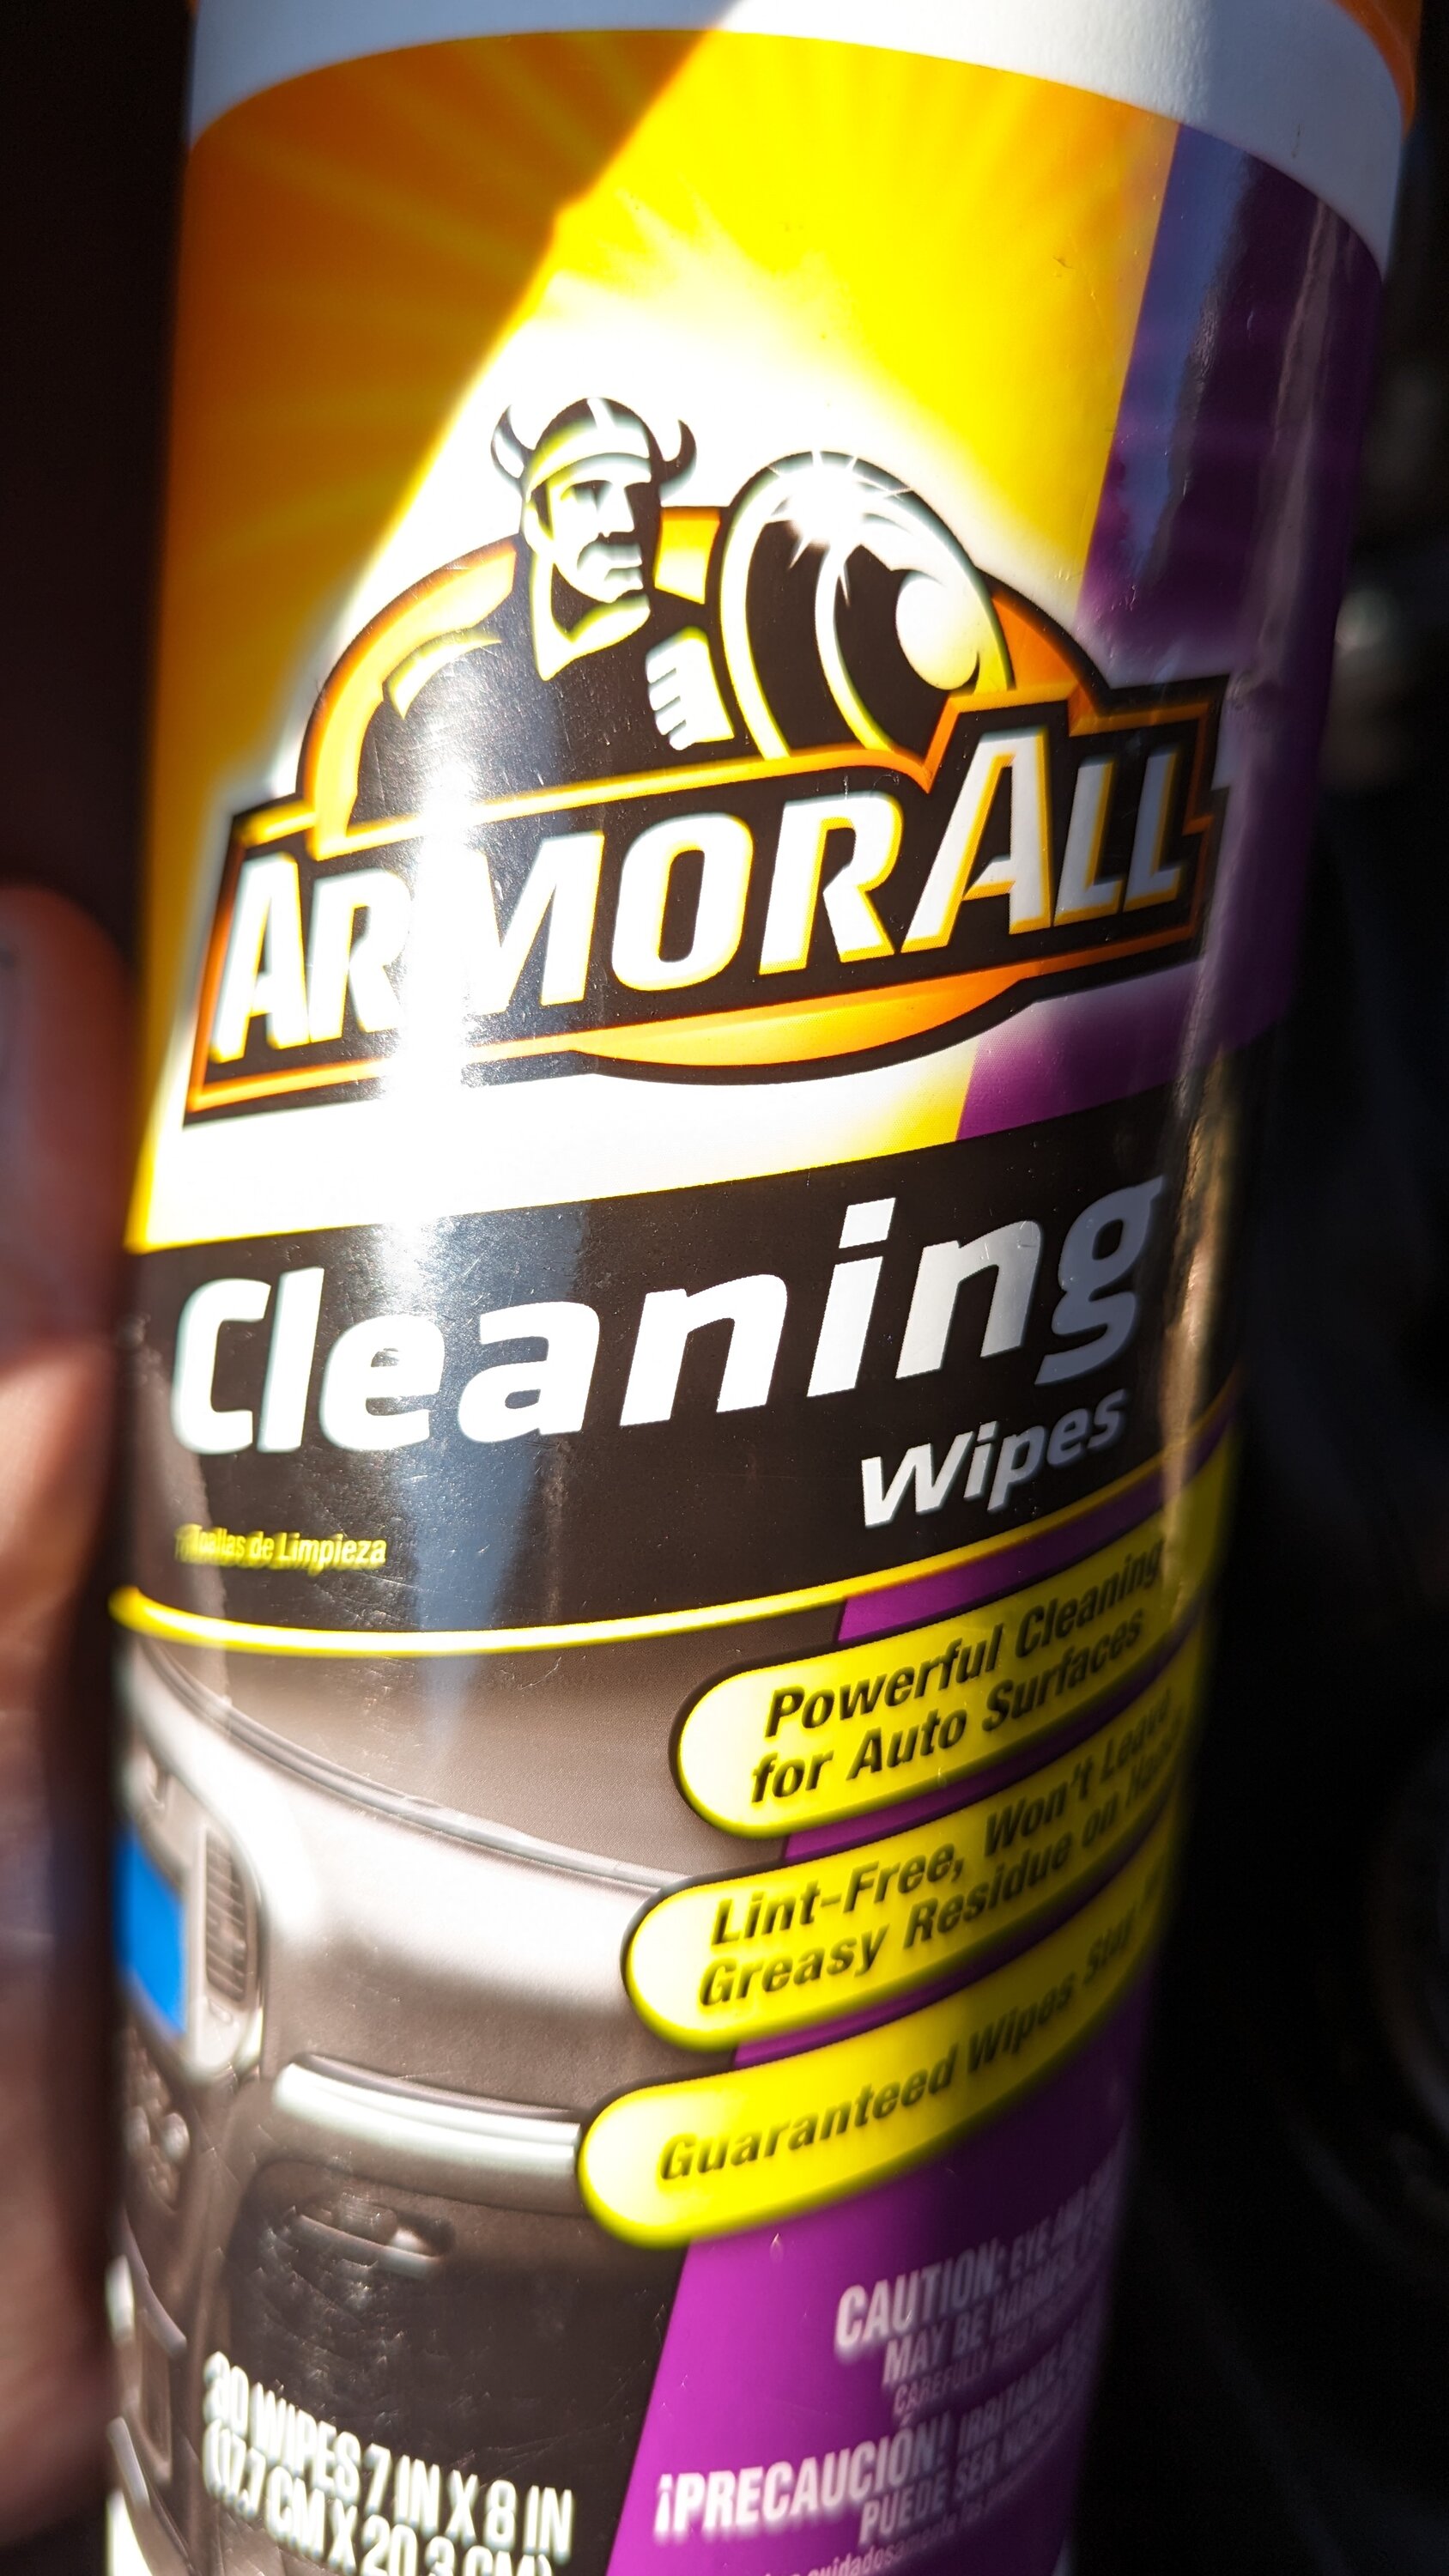  Armor All Car Headlights Cleaner Wipes , Cleaning